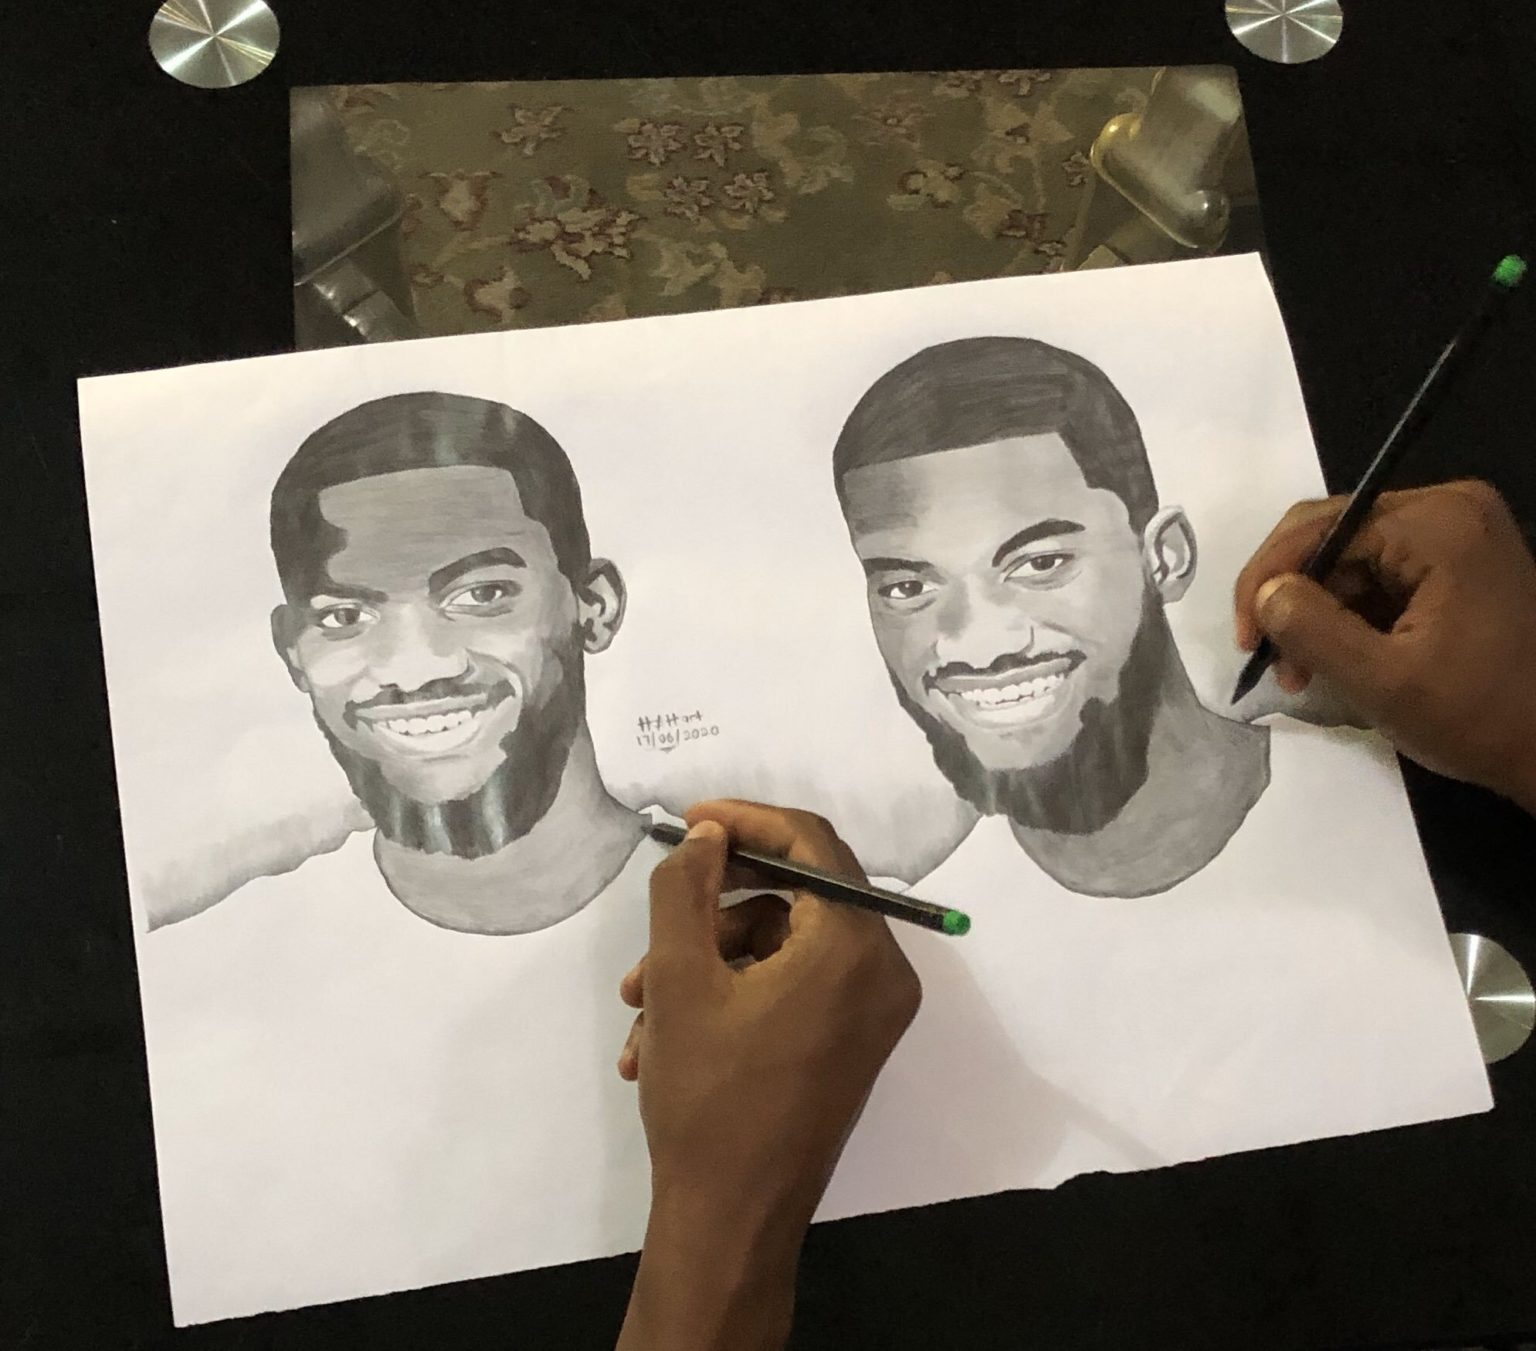 Twins Draw Themselves At The Same Time While Looking At Each Other (Photos)